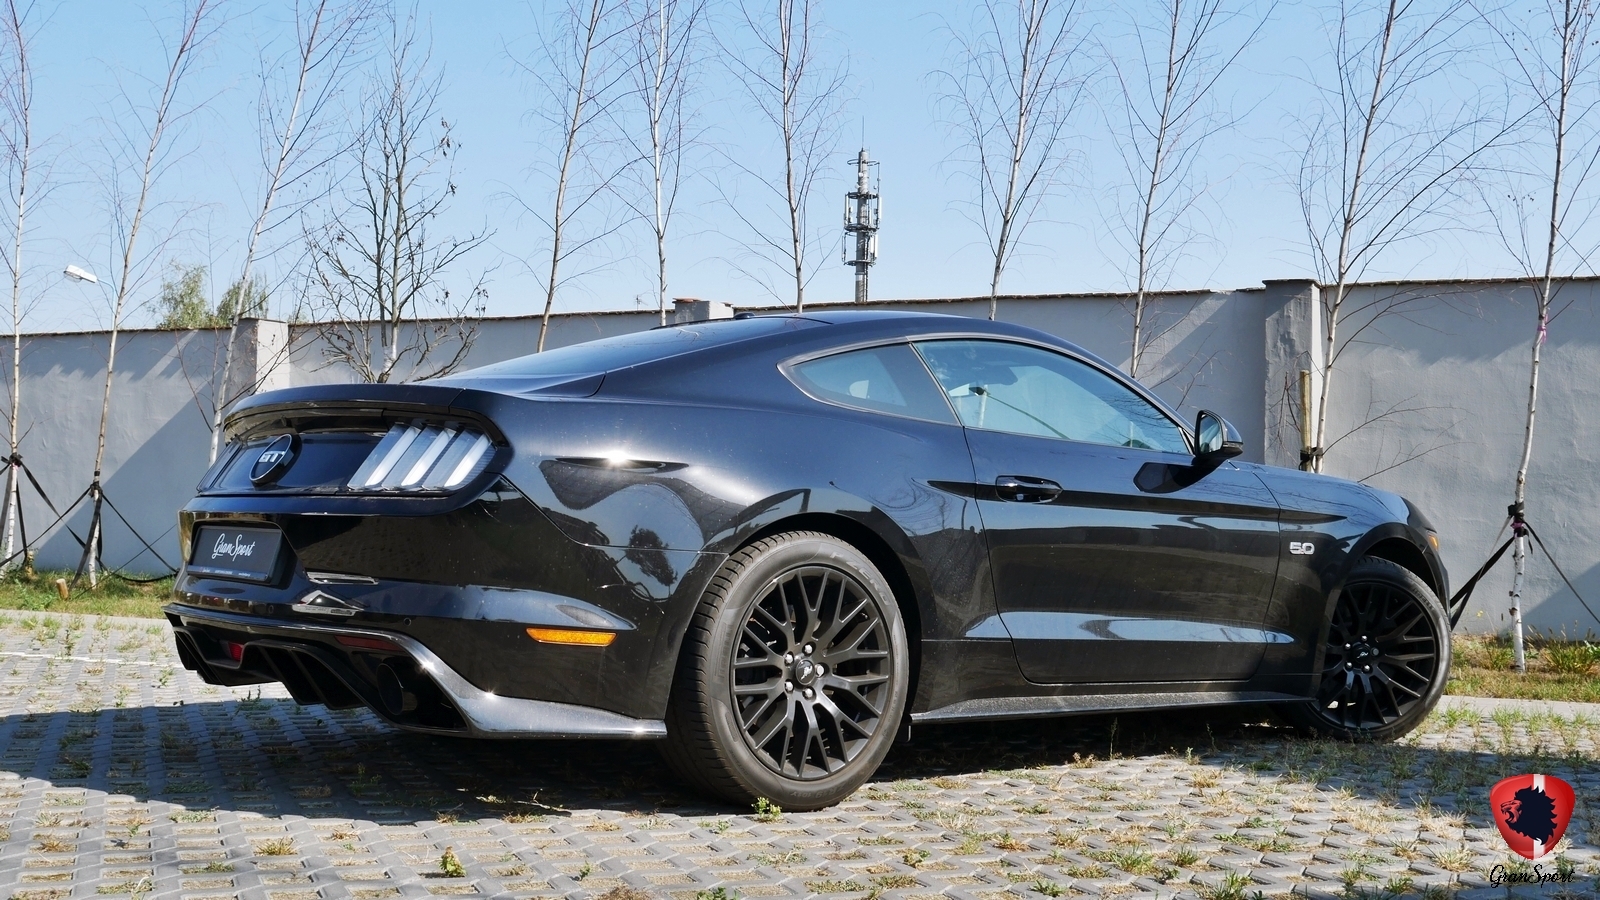 Ford Mustang GT 5.0 V8 Remus